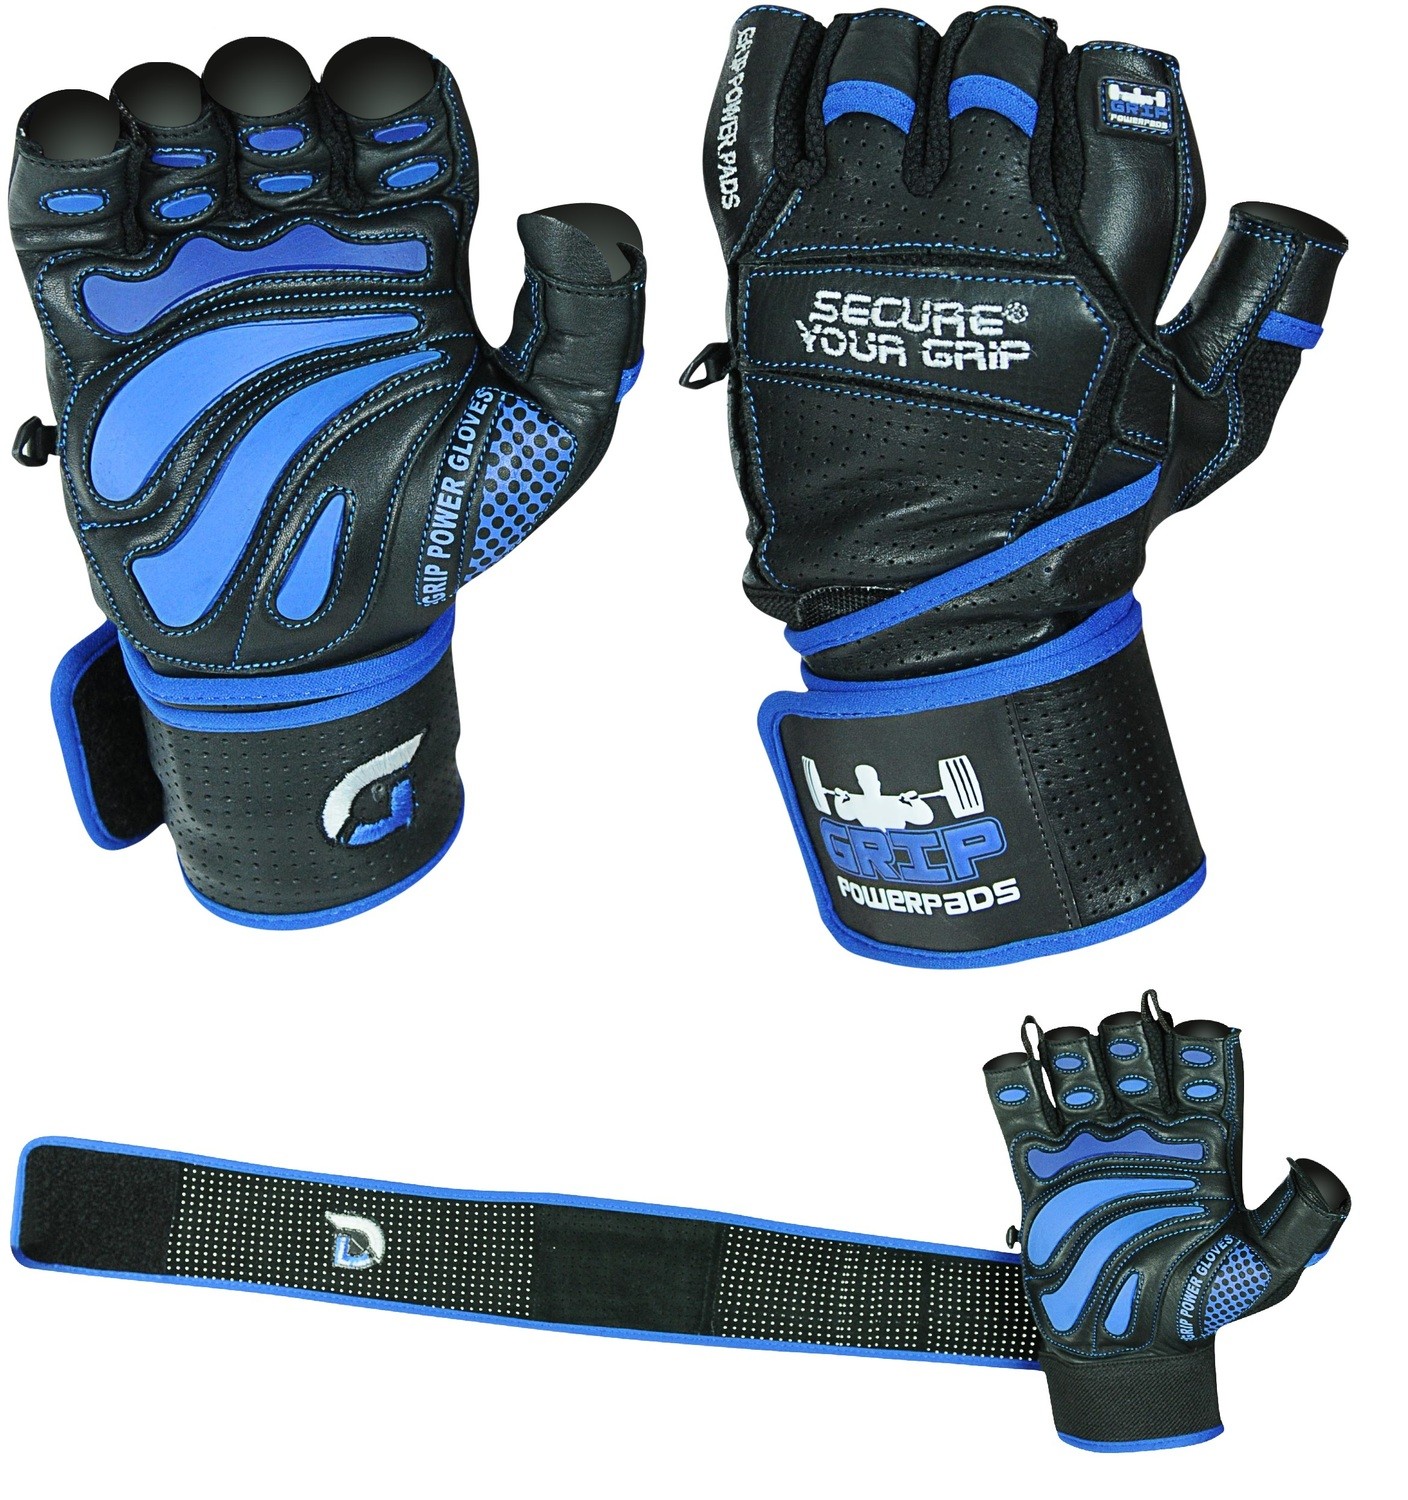 Grip Power Pads Elite Leather Gym Gloves with Built-in 2 Inches Wide Wrist Wraps